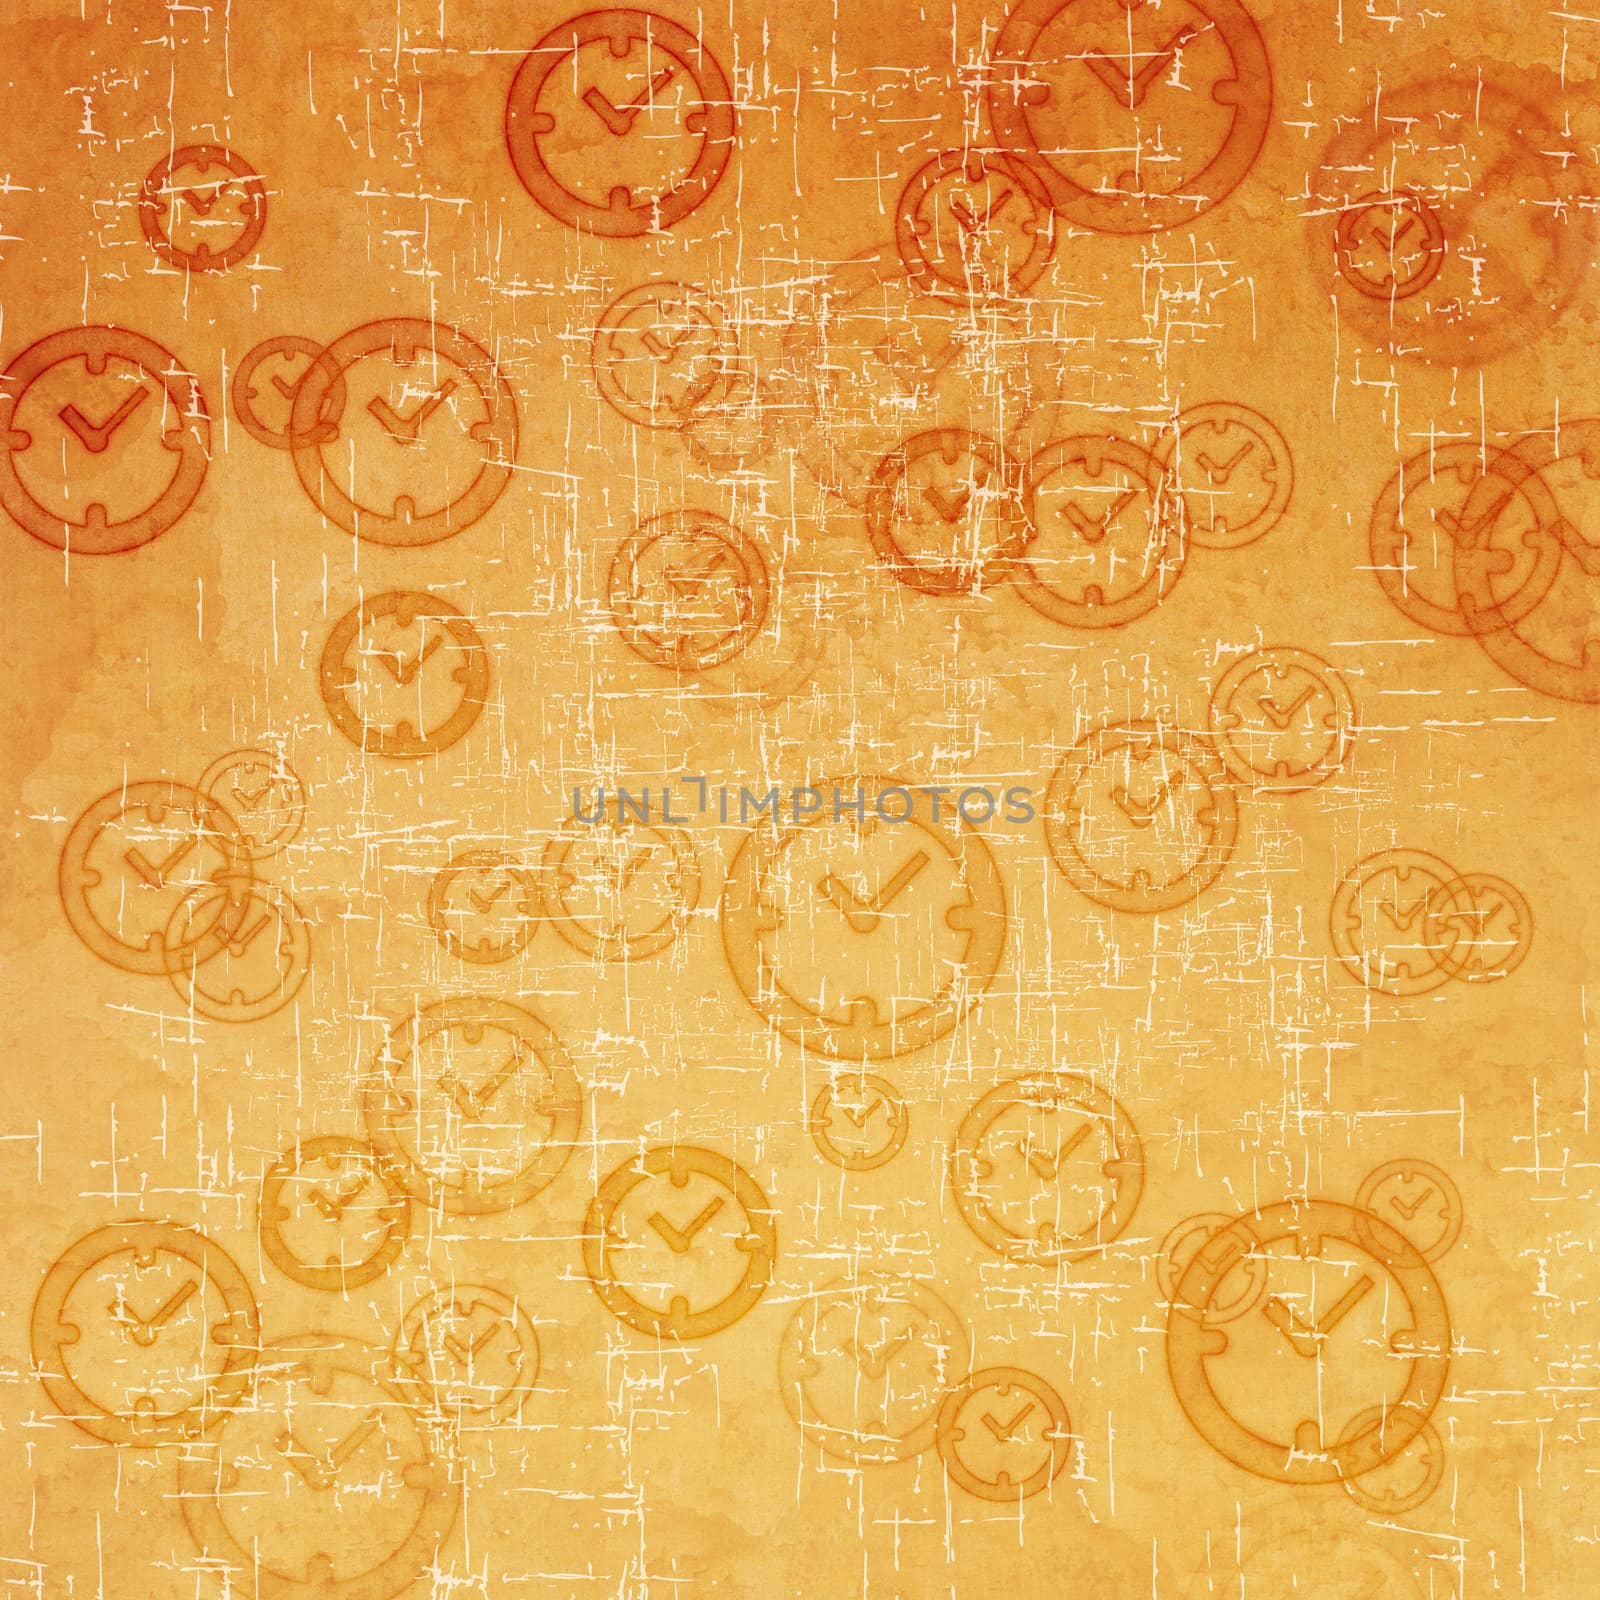 Clock icon on old paper background and pattern